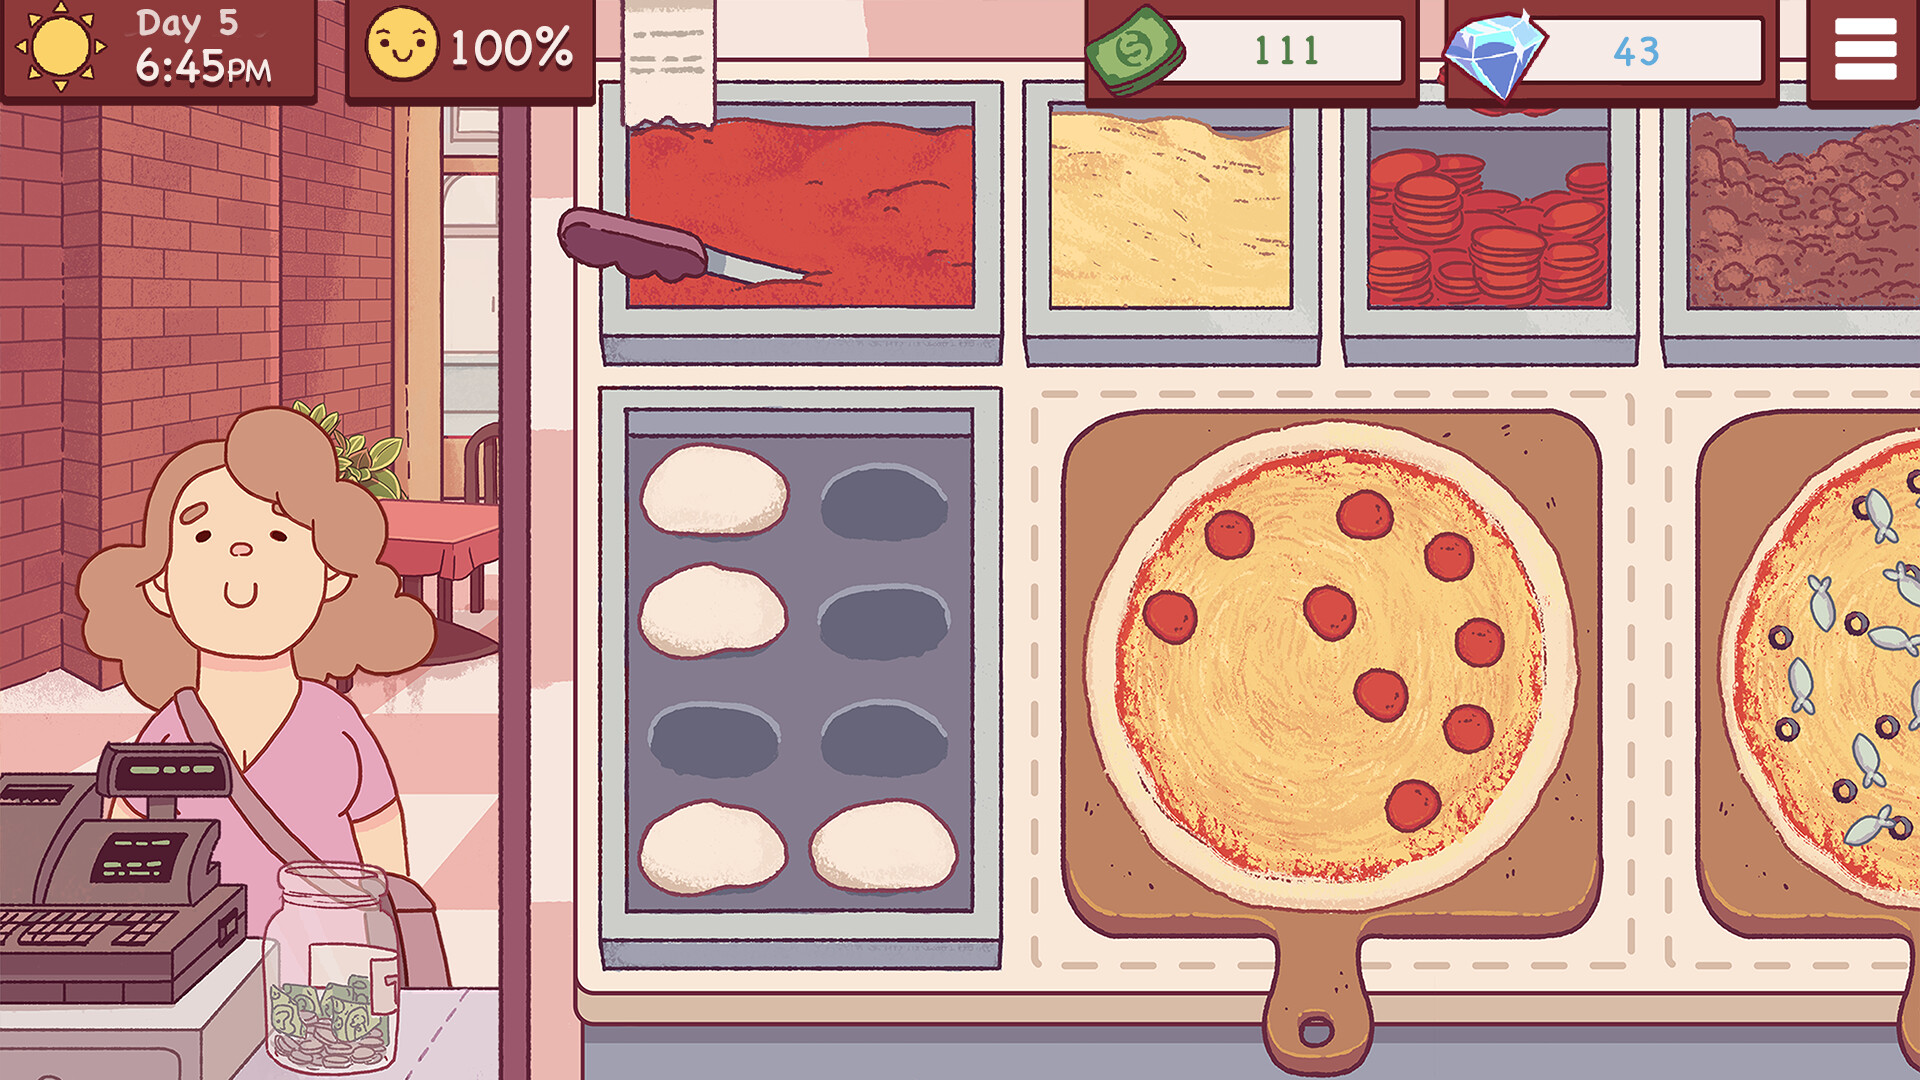 Find the best computers for Good Pizza, Great Pizza - Cooking Simulator Game